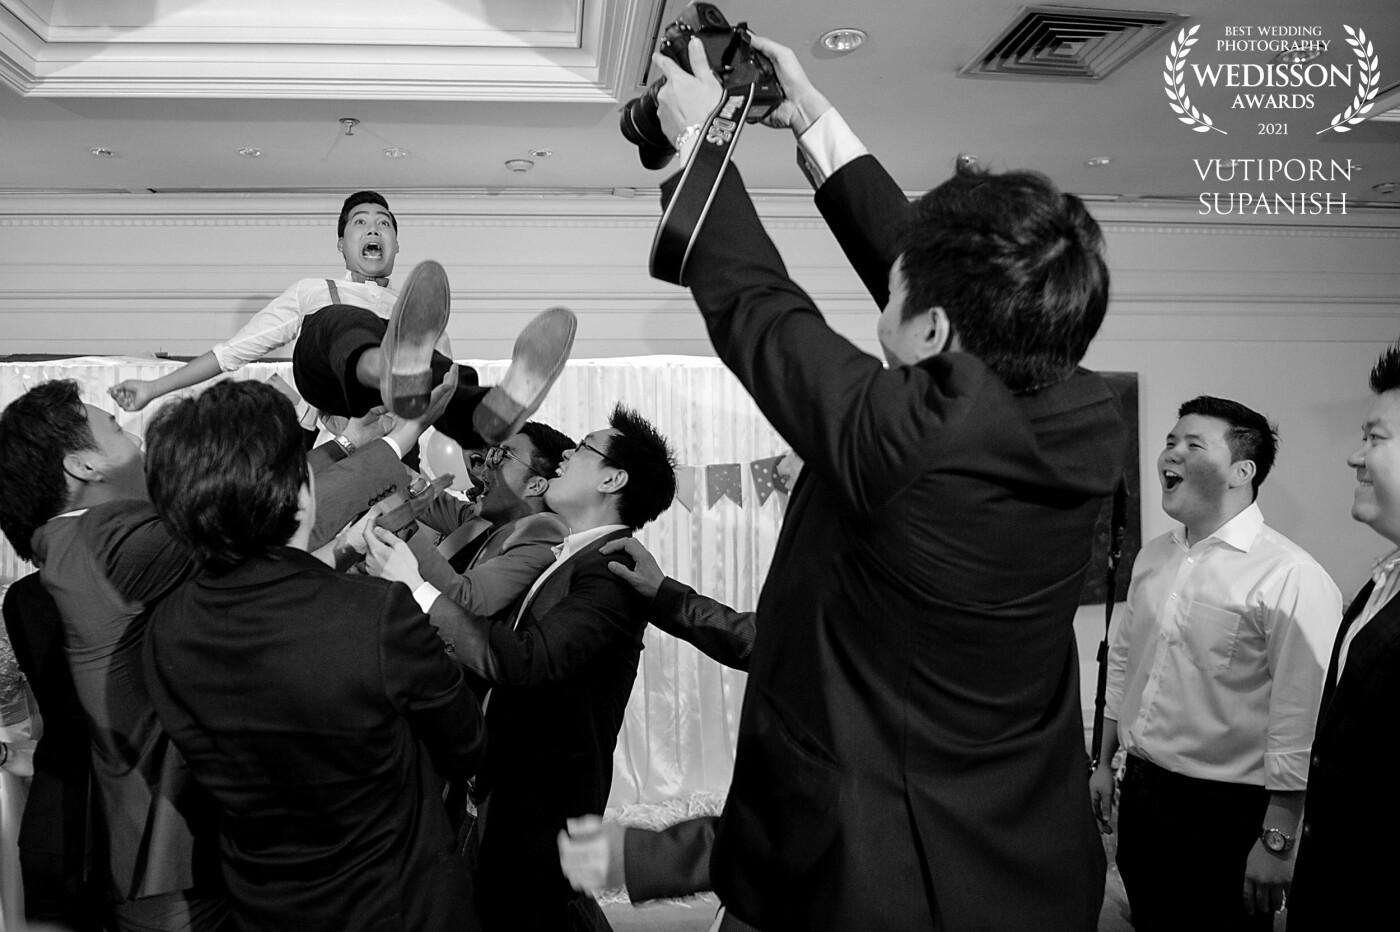 With the groom is very much loved by his friends. Of course, friends who attended the event had to celebrate the groom very much. Catching the groom toss to celebrate is a great fun for the groomsmen.